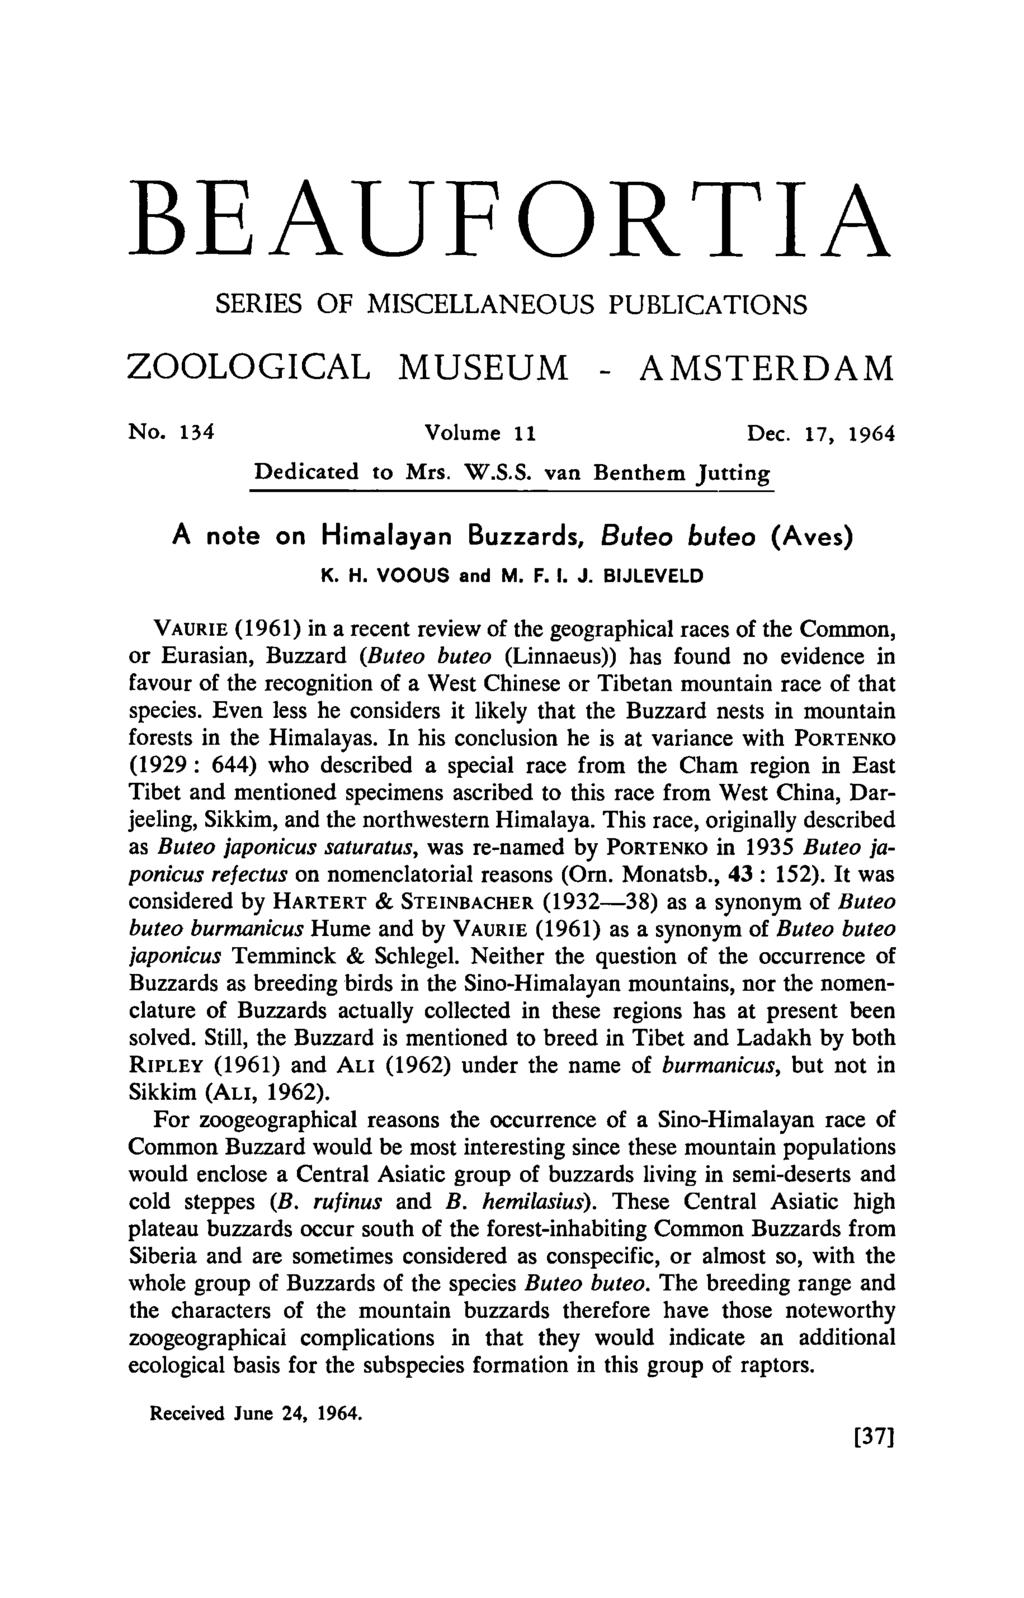 Beaufortia SERIES OF MISCELLANEOUS PUBLICATIONS ZOOLOGICAL MUSEUM - AMSTERDAM No. 134 Volume 11 Dec. 17, 1964 Dedicated to Mrs. W.S.S. van Benthem Jutting A note on Himalayan Buzzards, Buteo buteo (Aves) K.